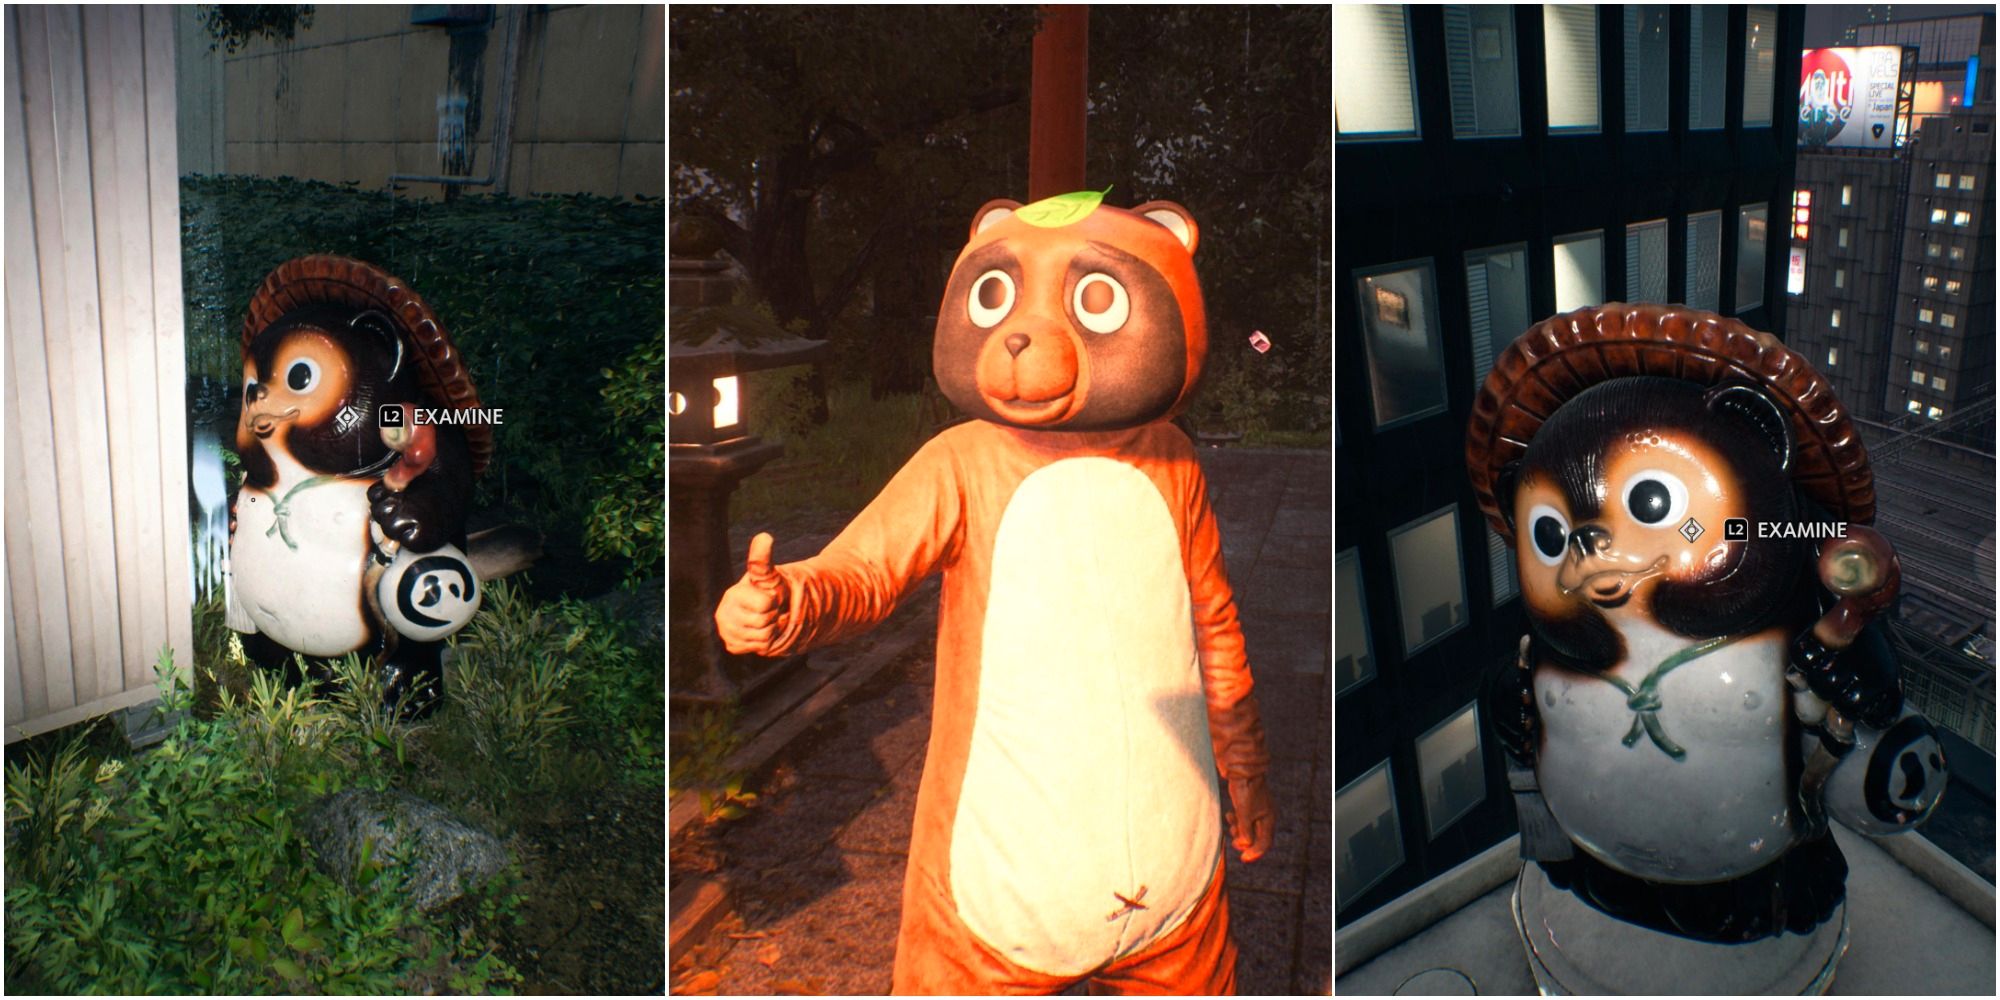 Ghostwire: Tokyo collage - two hidden tanuki statues and a tanuki outfit